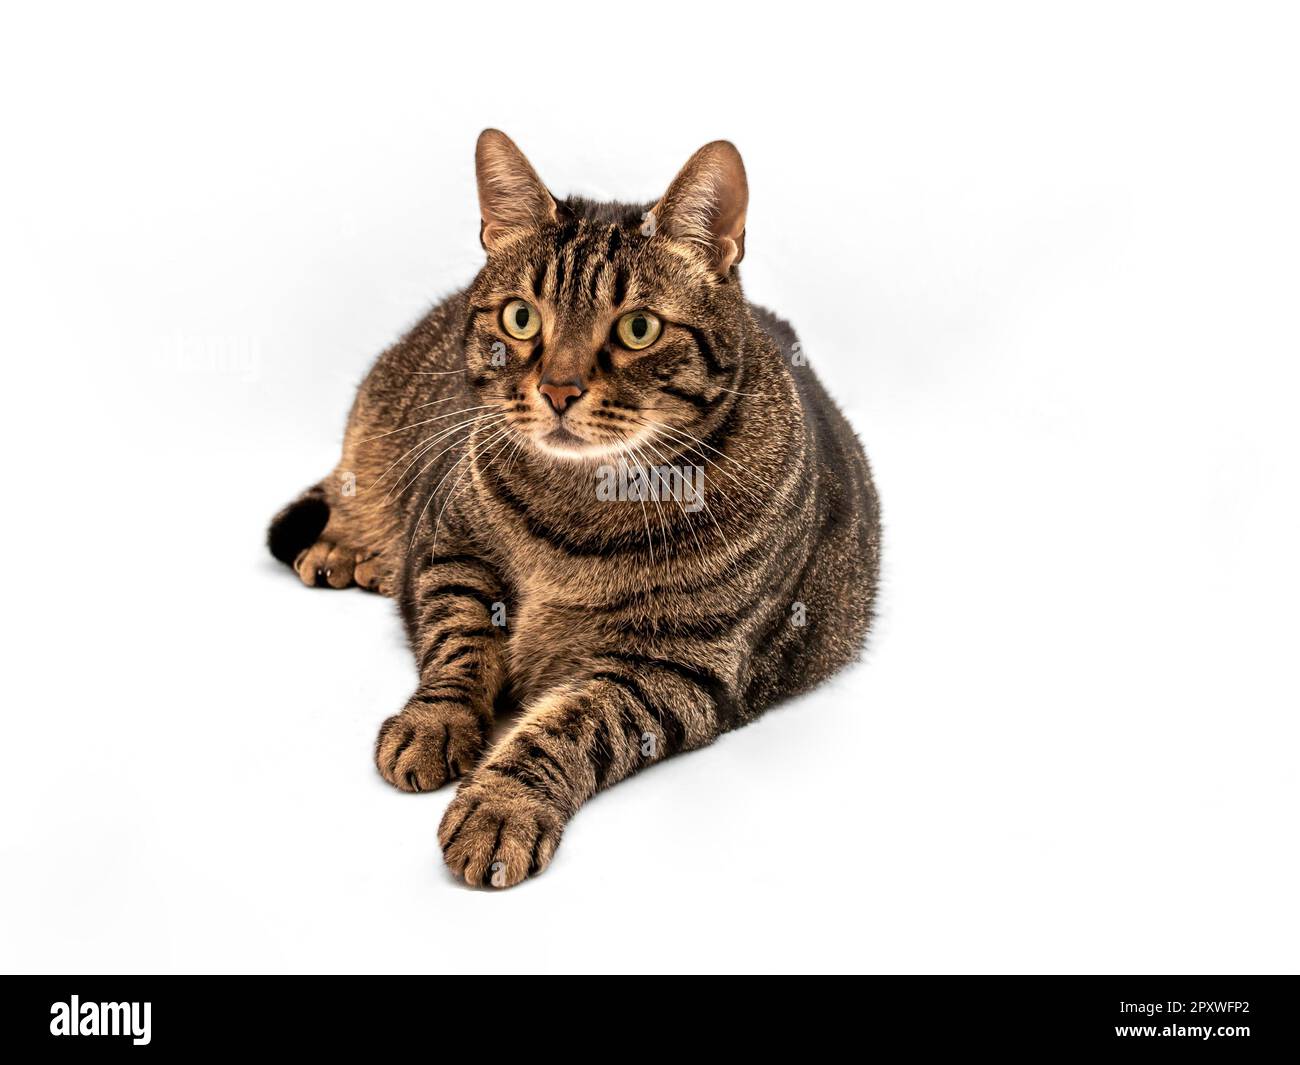 Tabby European cat with orange accents lies facing forward, legs stretched out. Intense yellow-green gaze fixed ahead. Black and gray fur exquisite. Stock Photo